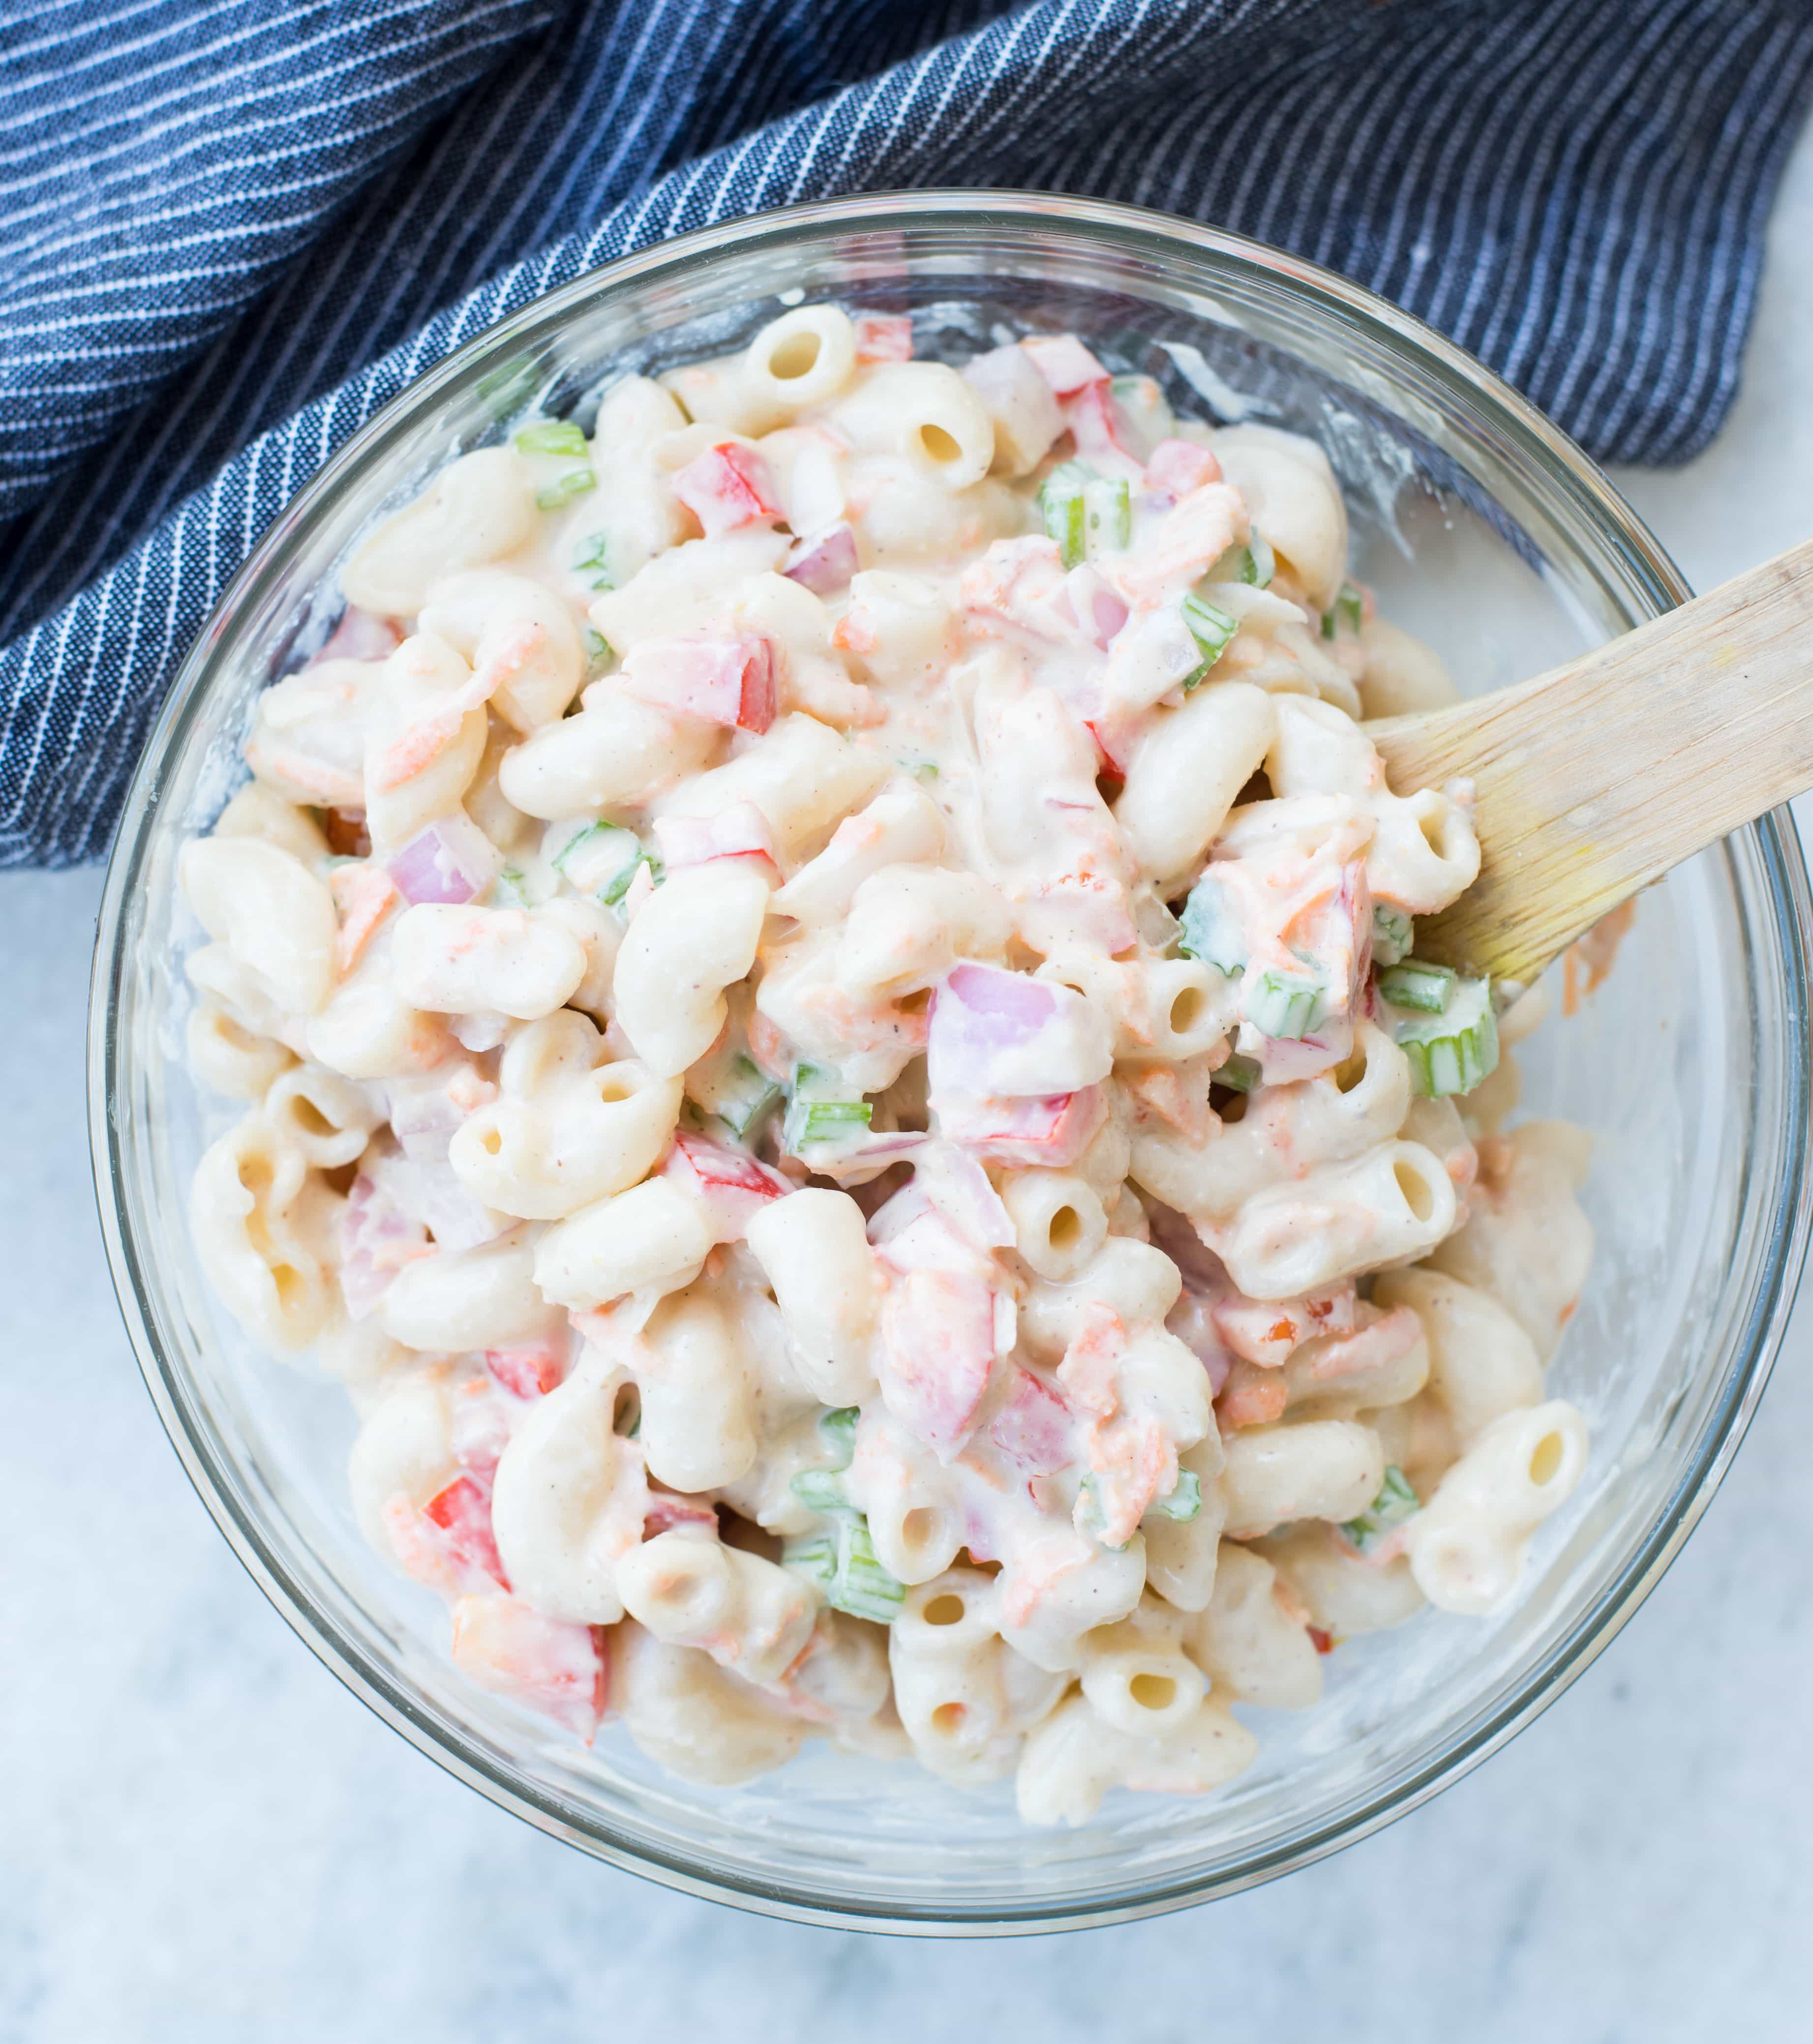 Delicious Vegan Macaroni Salad is a perfect side for Picnic, potluck or Bar...